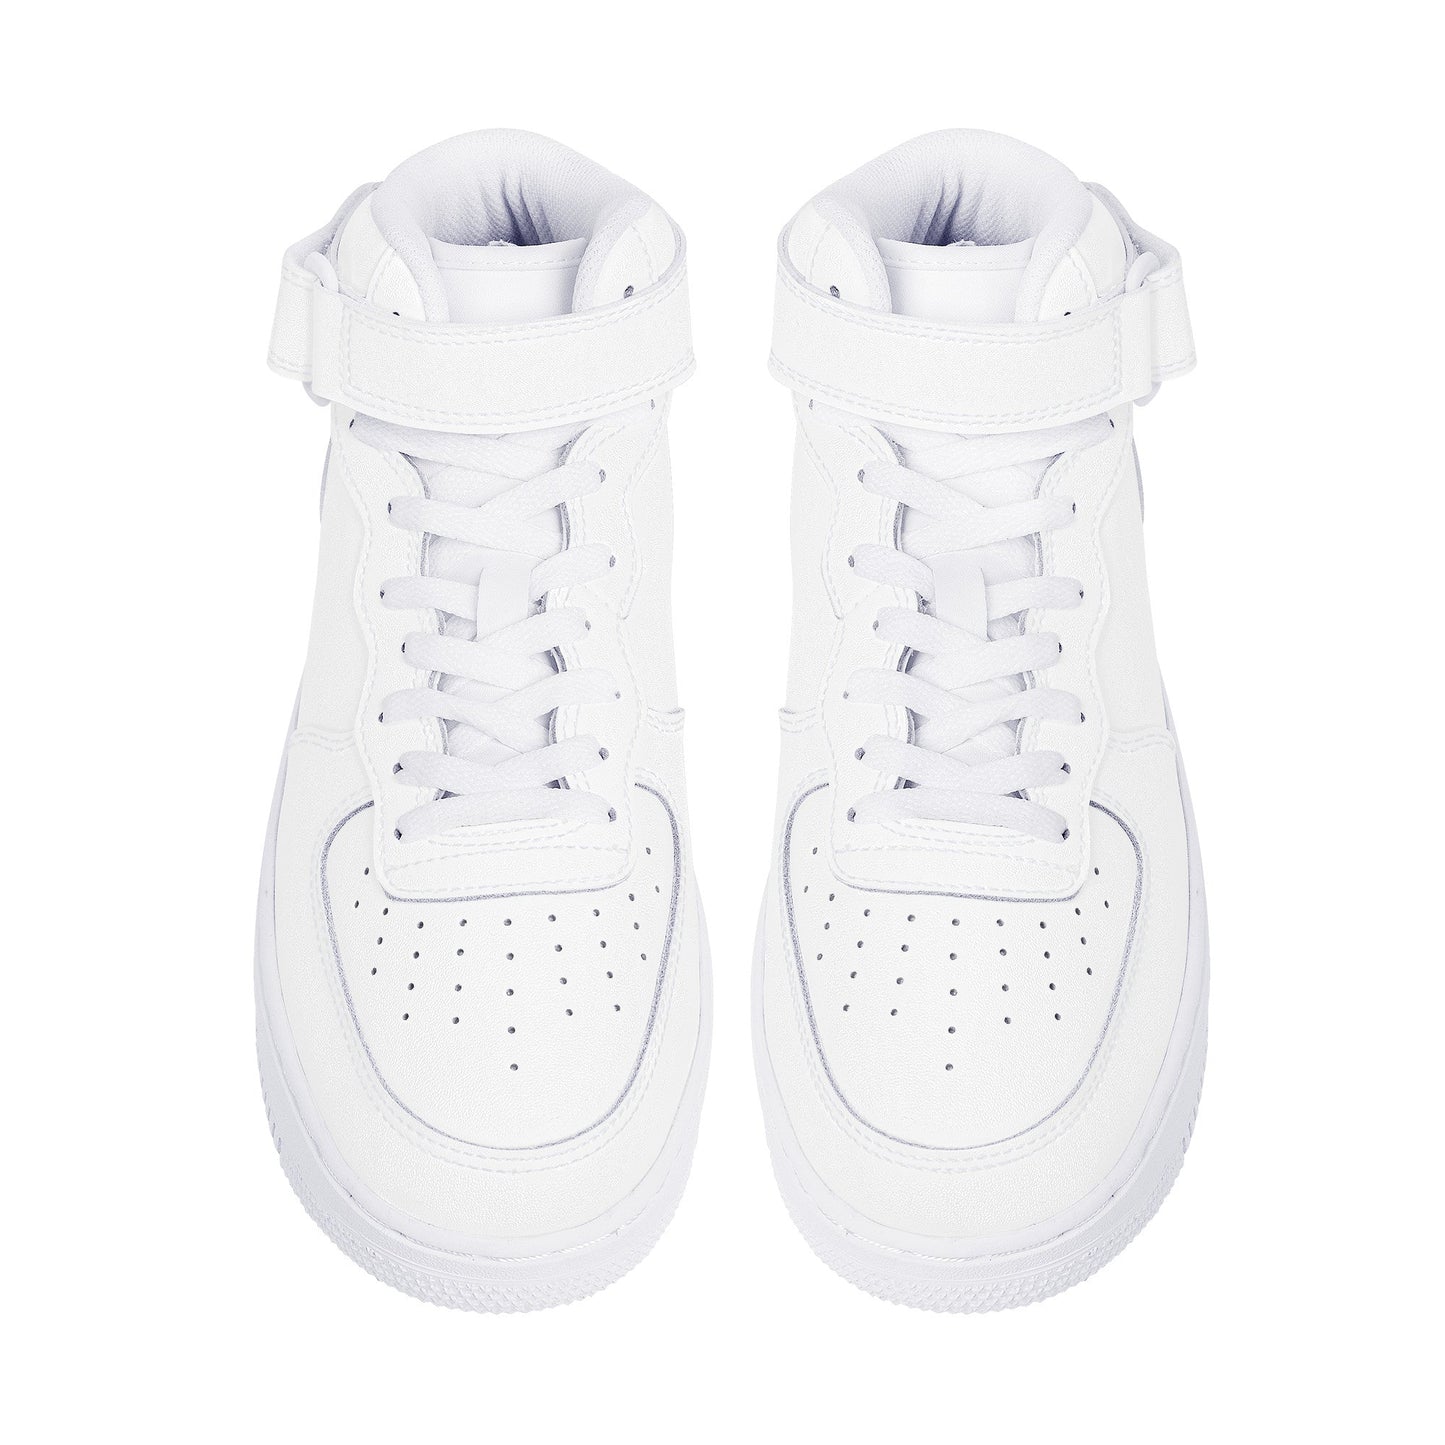 Custom High Top Unisex Sneakers -SF F9 Colloid Colors 